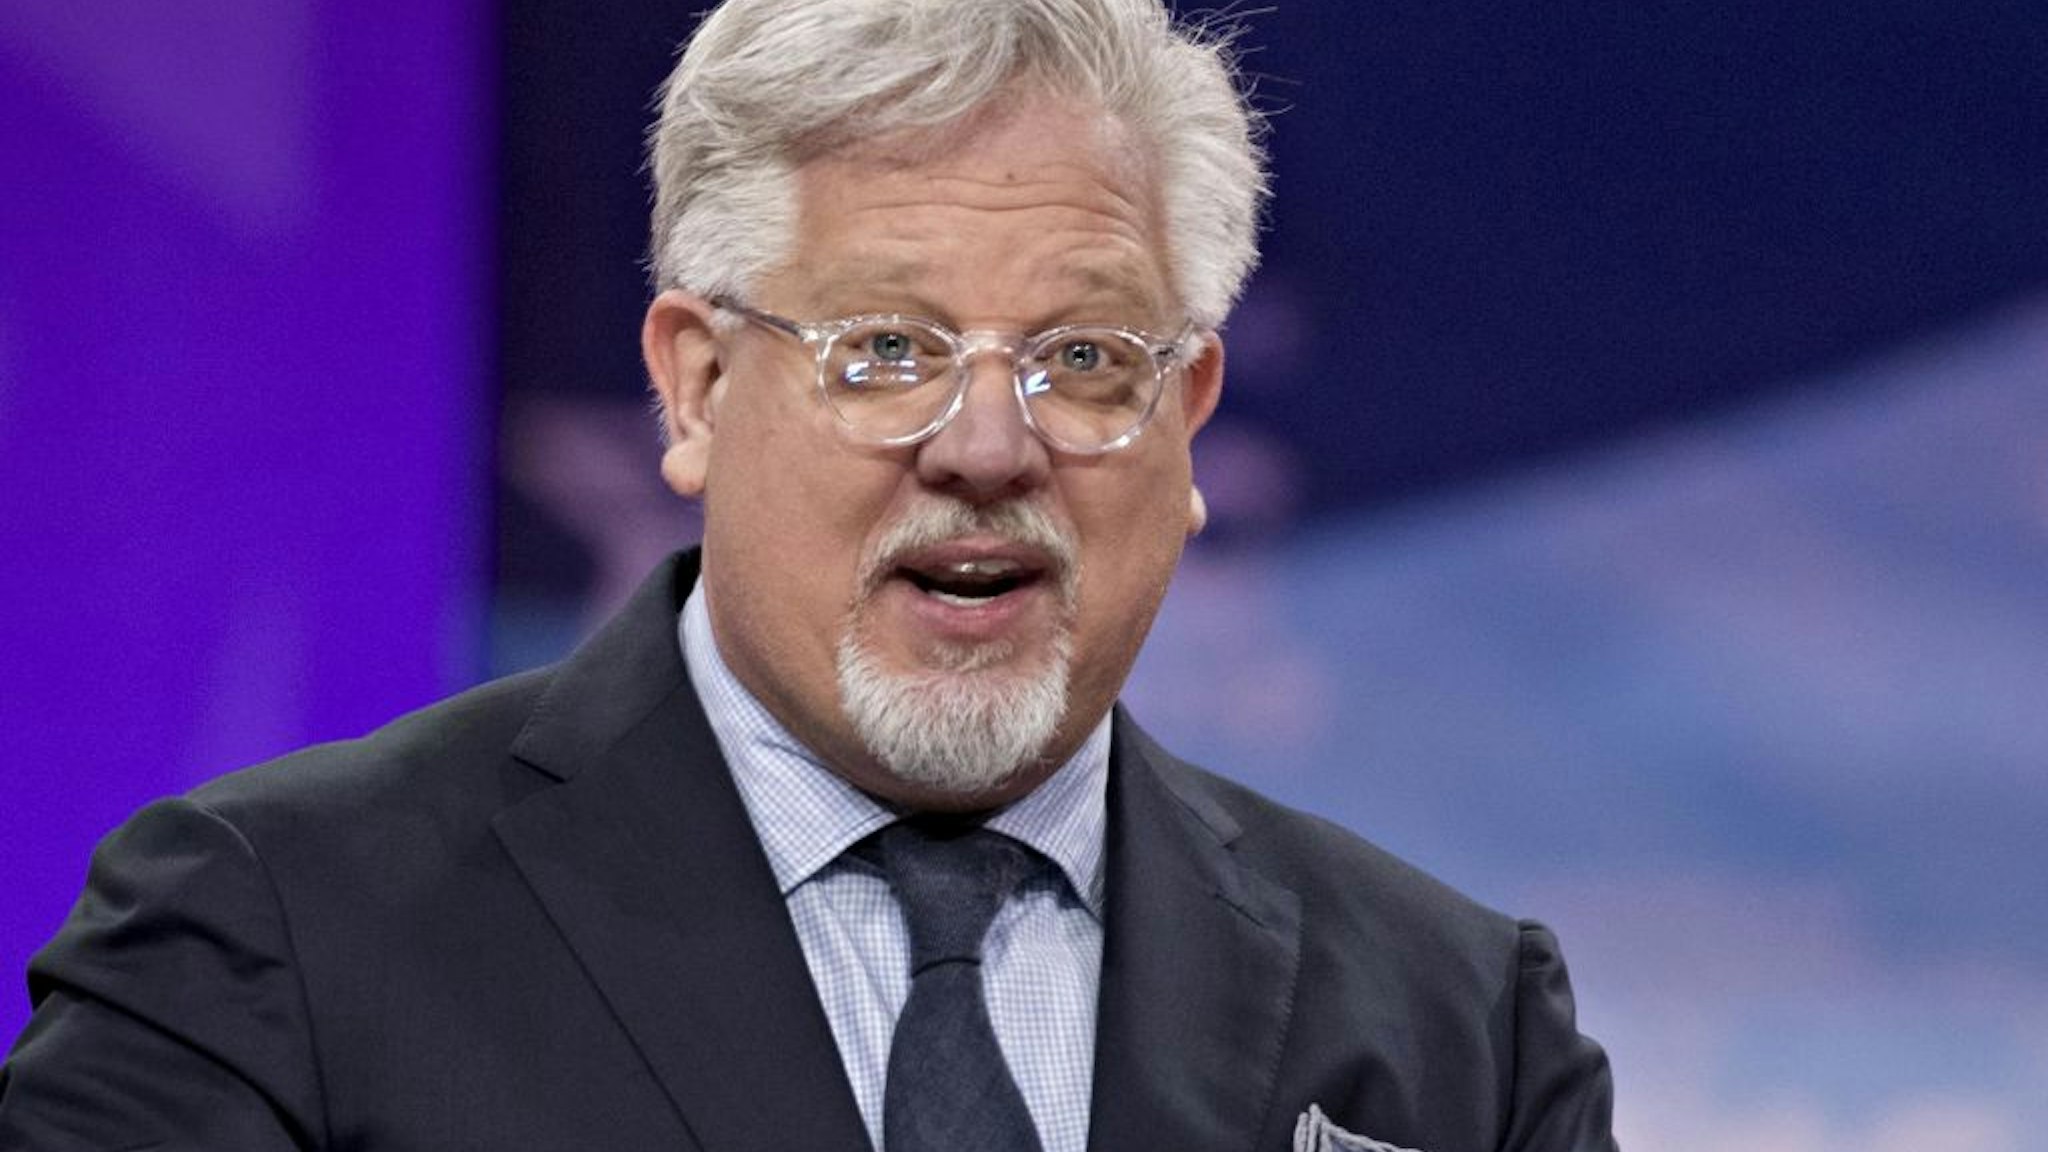 Television personality Glenn Beck speaks during the Conservative Political Action Conference (CPAC) in National Harbor, Maryland, U.S., on Friday, March 1, 2019.